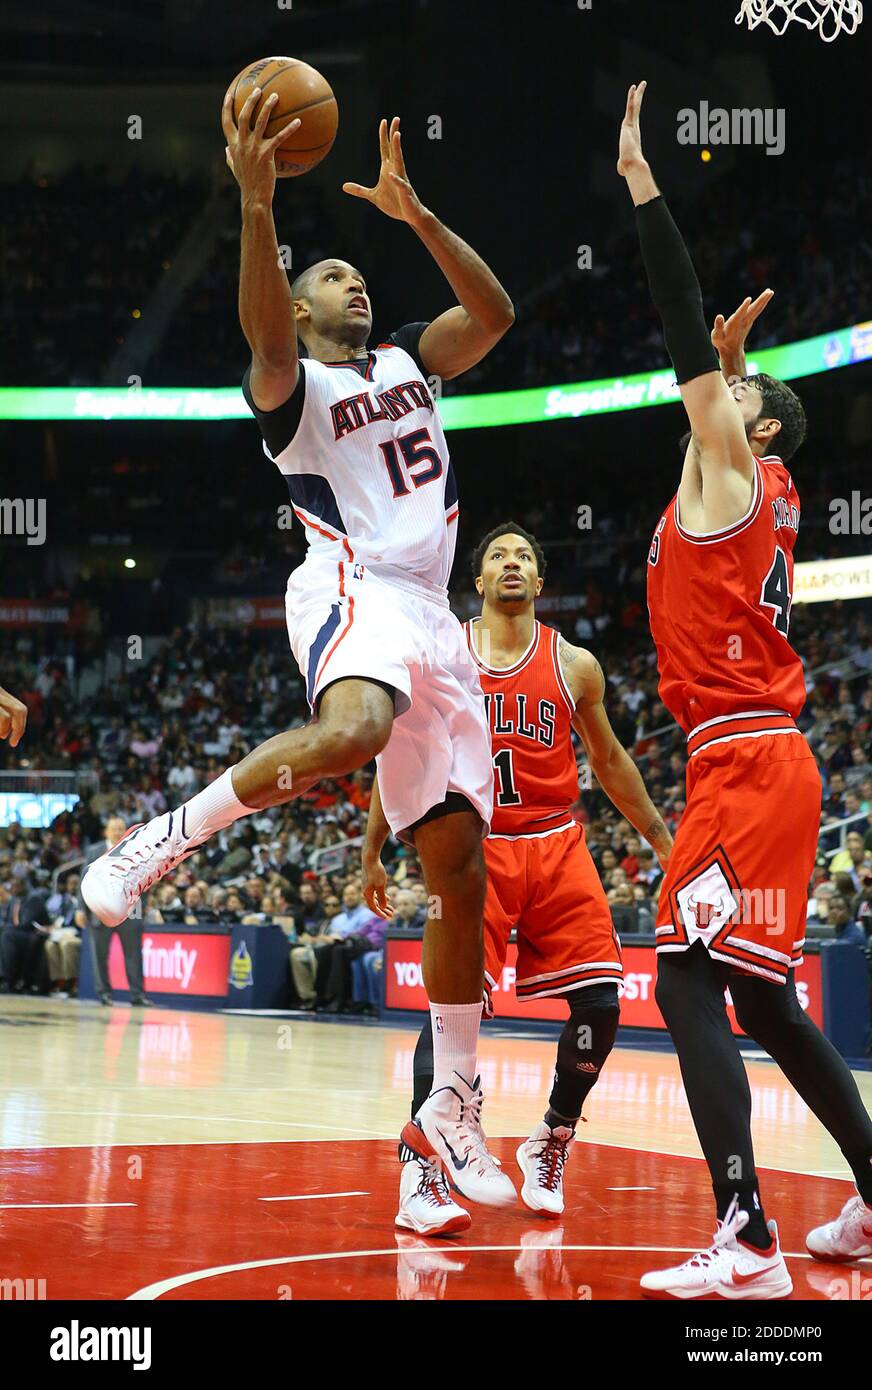 NO FILM, NO VIDEO, NO TV, NO DOCUMENTARY - Atlanta Hawks' Al Horford grabs a rebound and goes to the basket for two points over Chicago Bulls defenders at Philips Arena in Atlanta, GA, USA on December 15, 2014. Photo by Curtis Compton/Atlanta Journal-Constitution/TNS/ABACAPRESS.COM Stock Photo